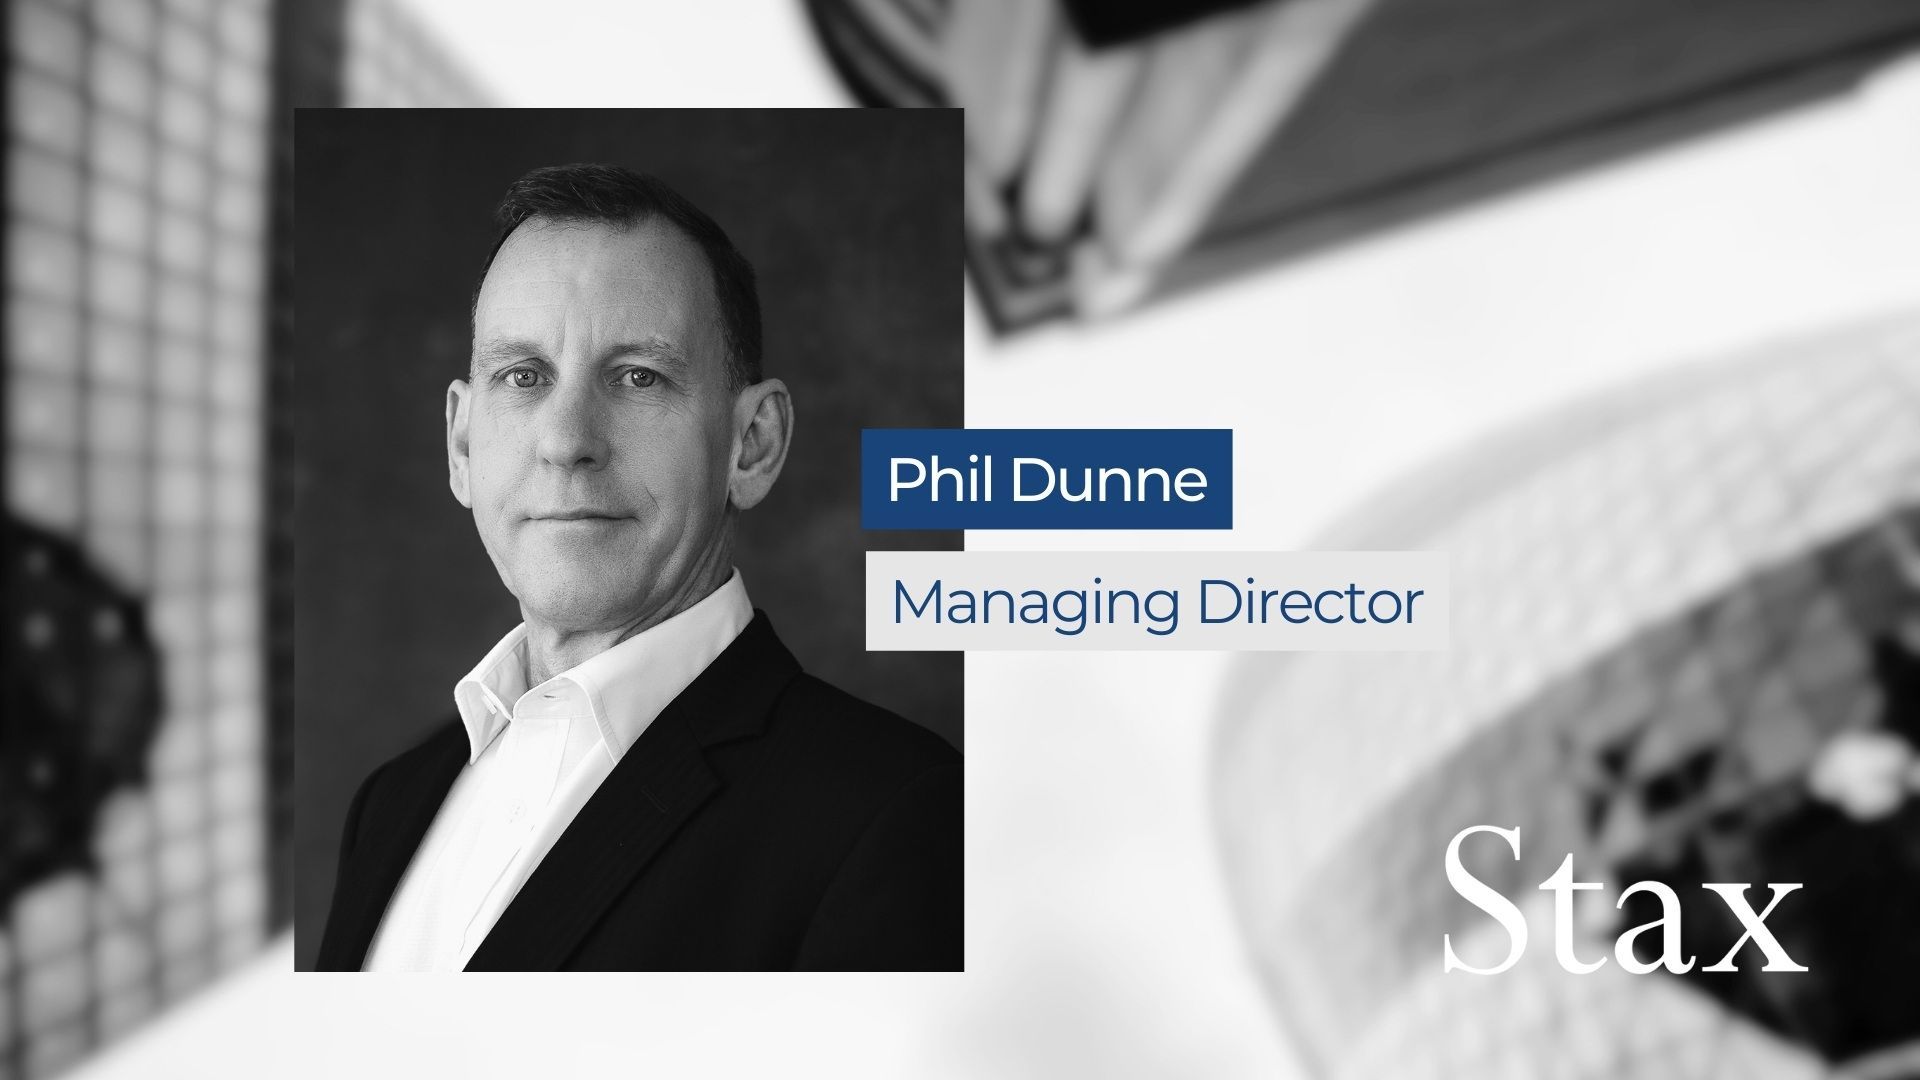 Image of Phil Dunne with text which states his name and title (managing director). Stax logo is in the lower right hand corner. 